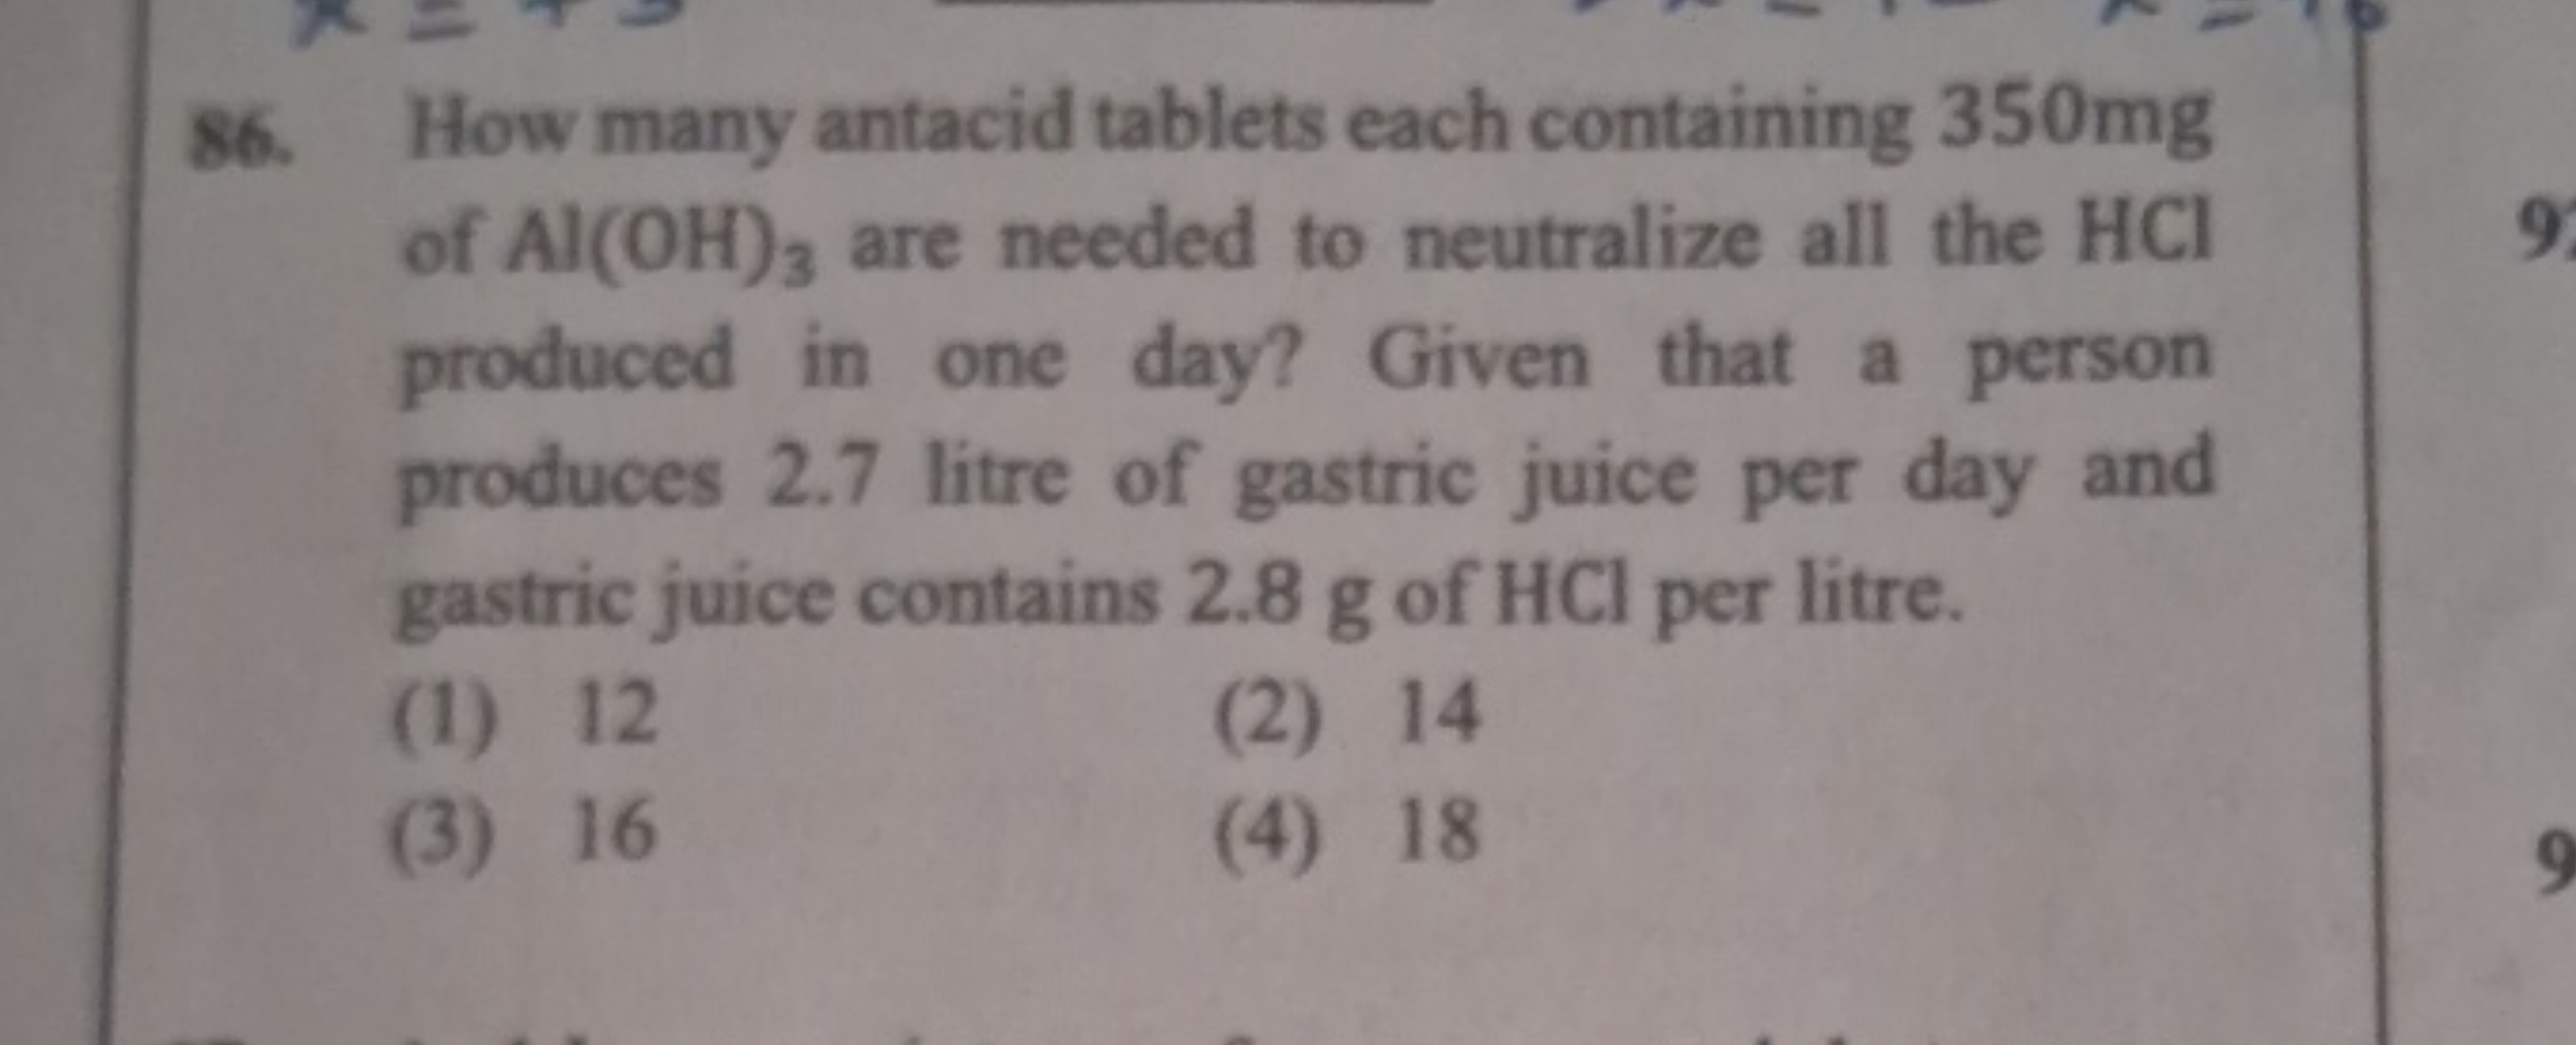 How many antacid tablets each containing 350mg of Al(OH)3​ are needed 